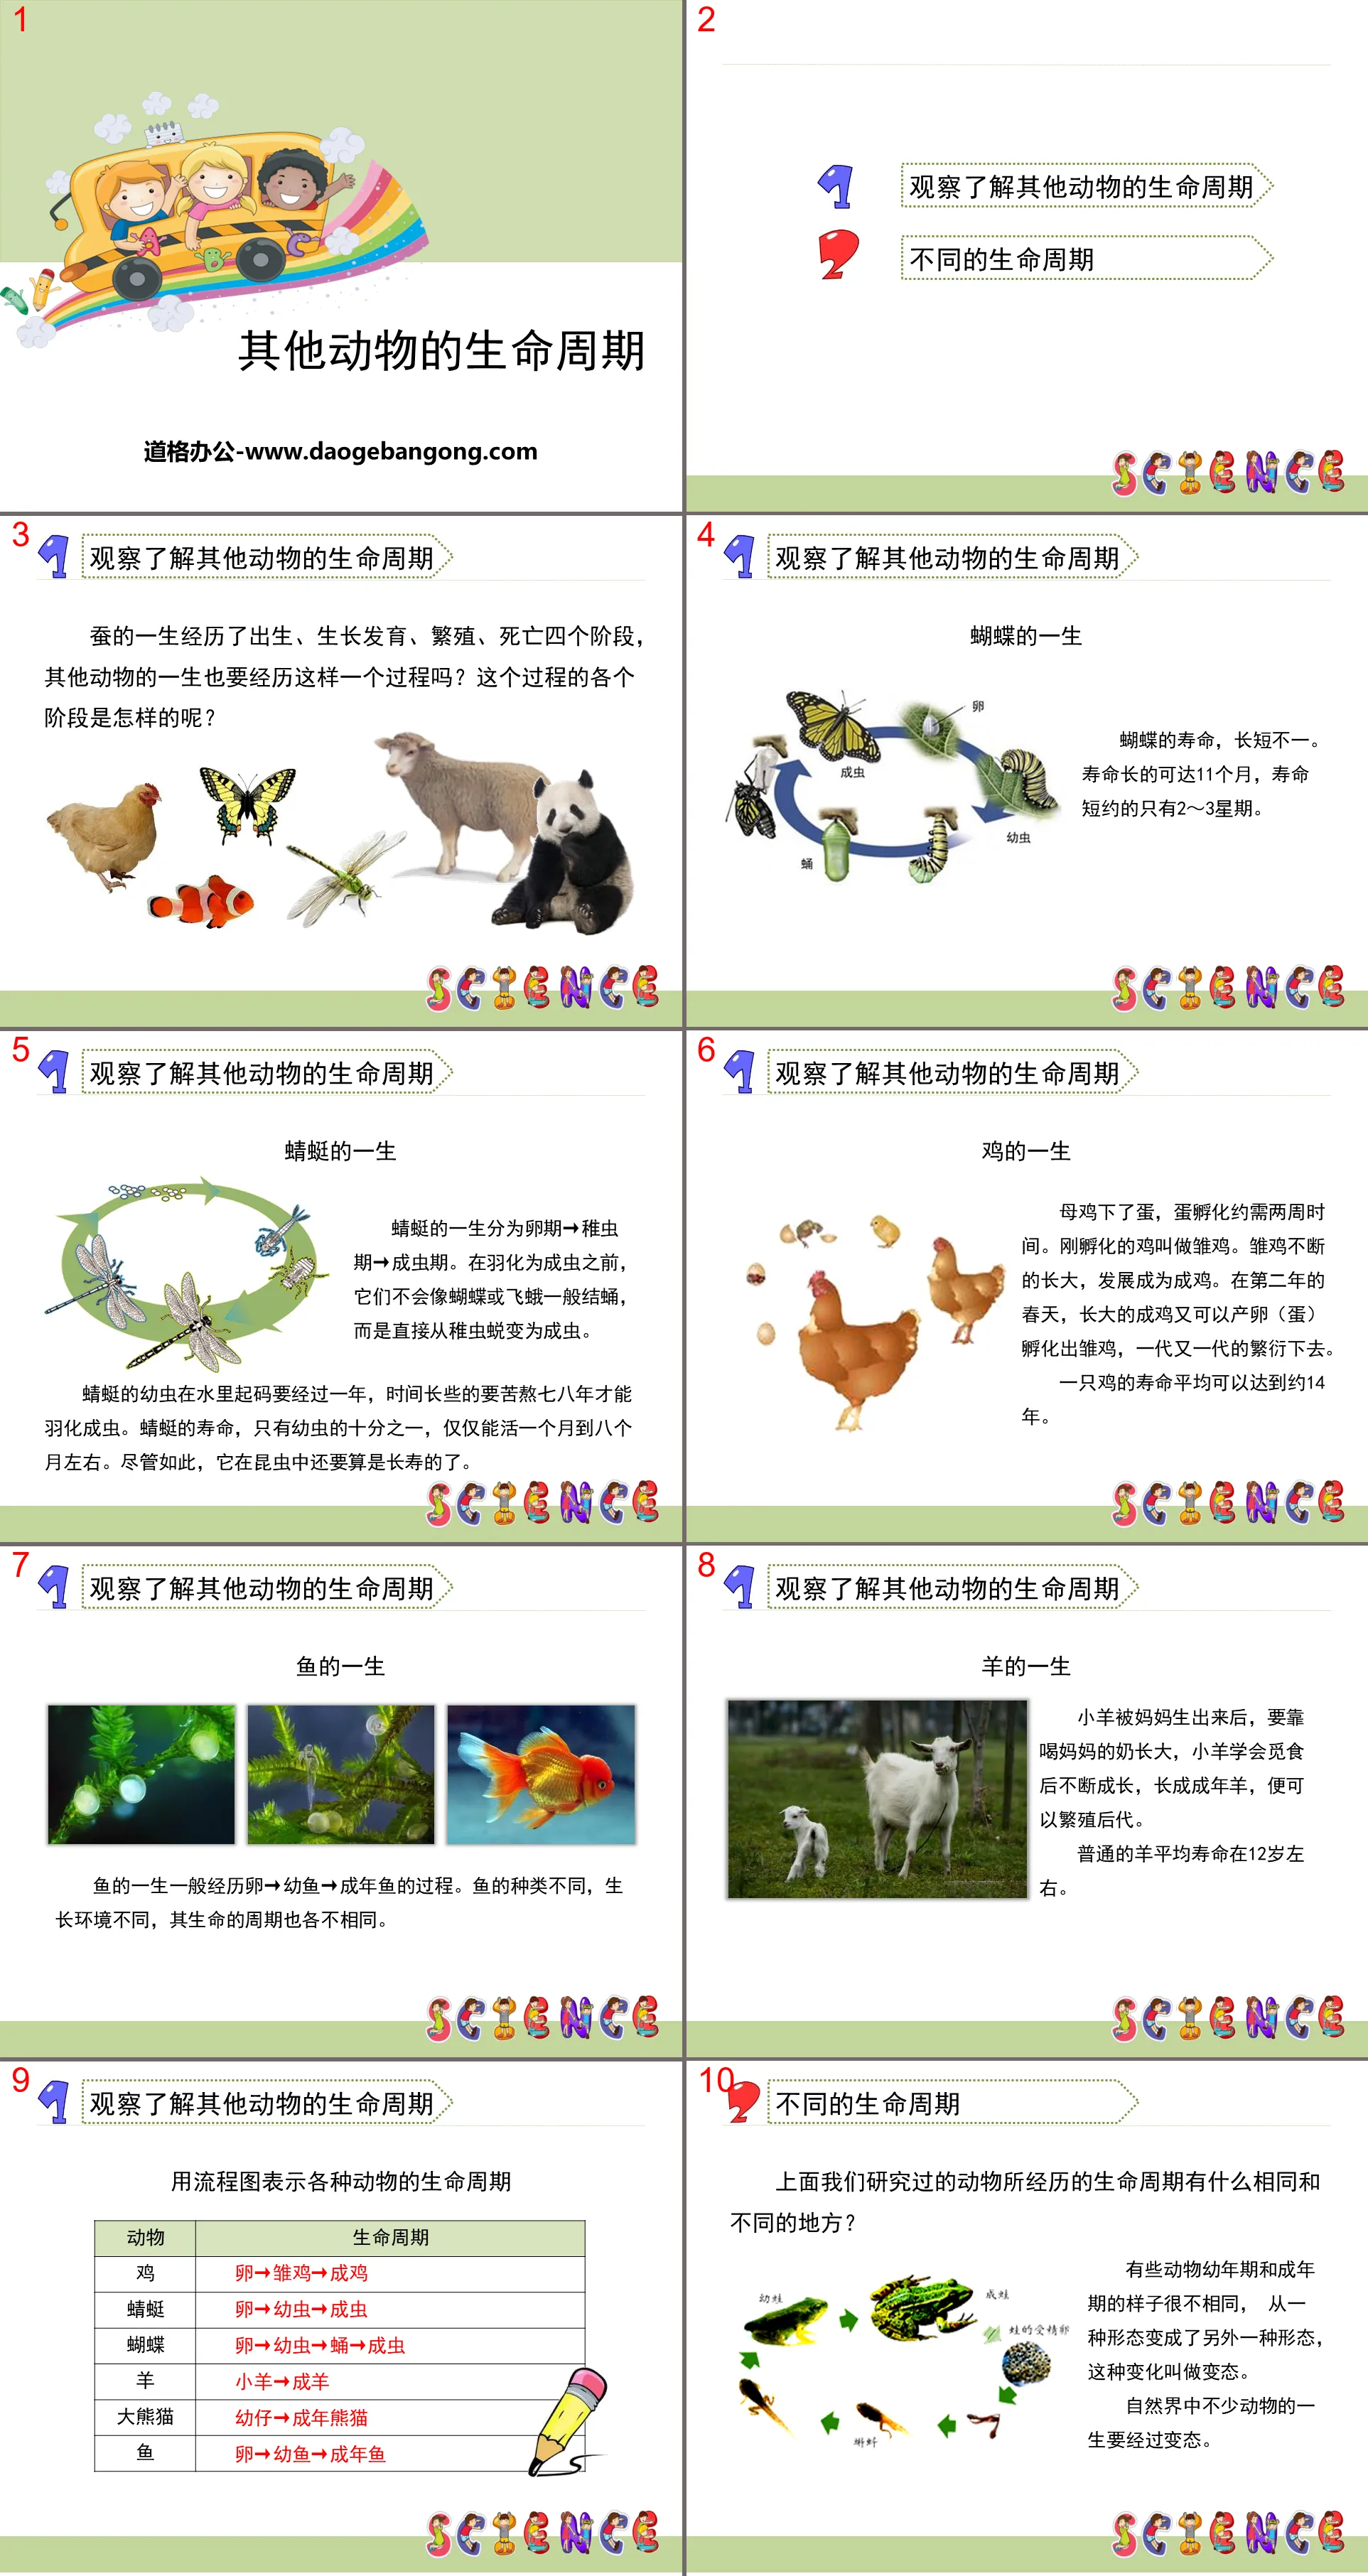 "Life Cycle of Other Animals" Animal Life Cycle PPT